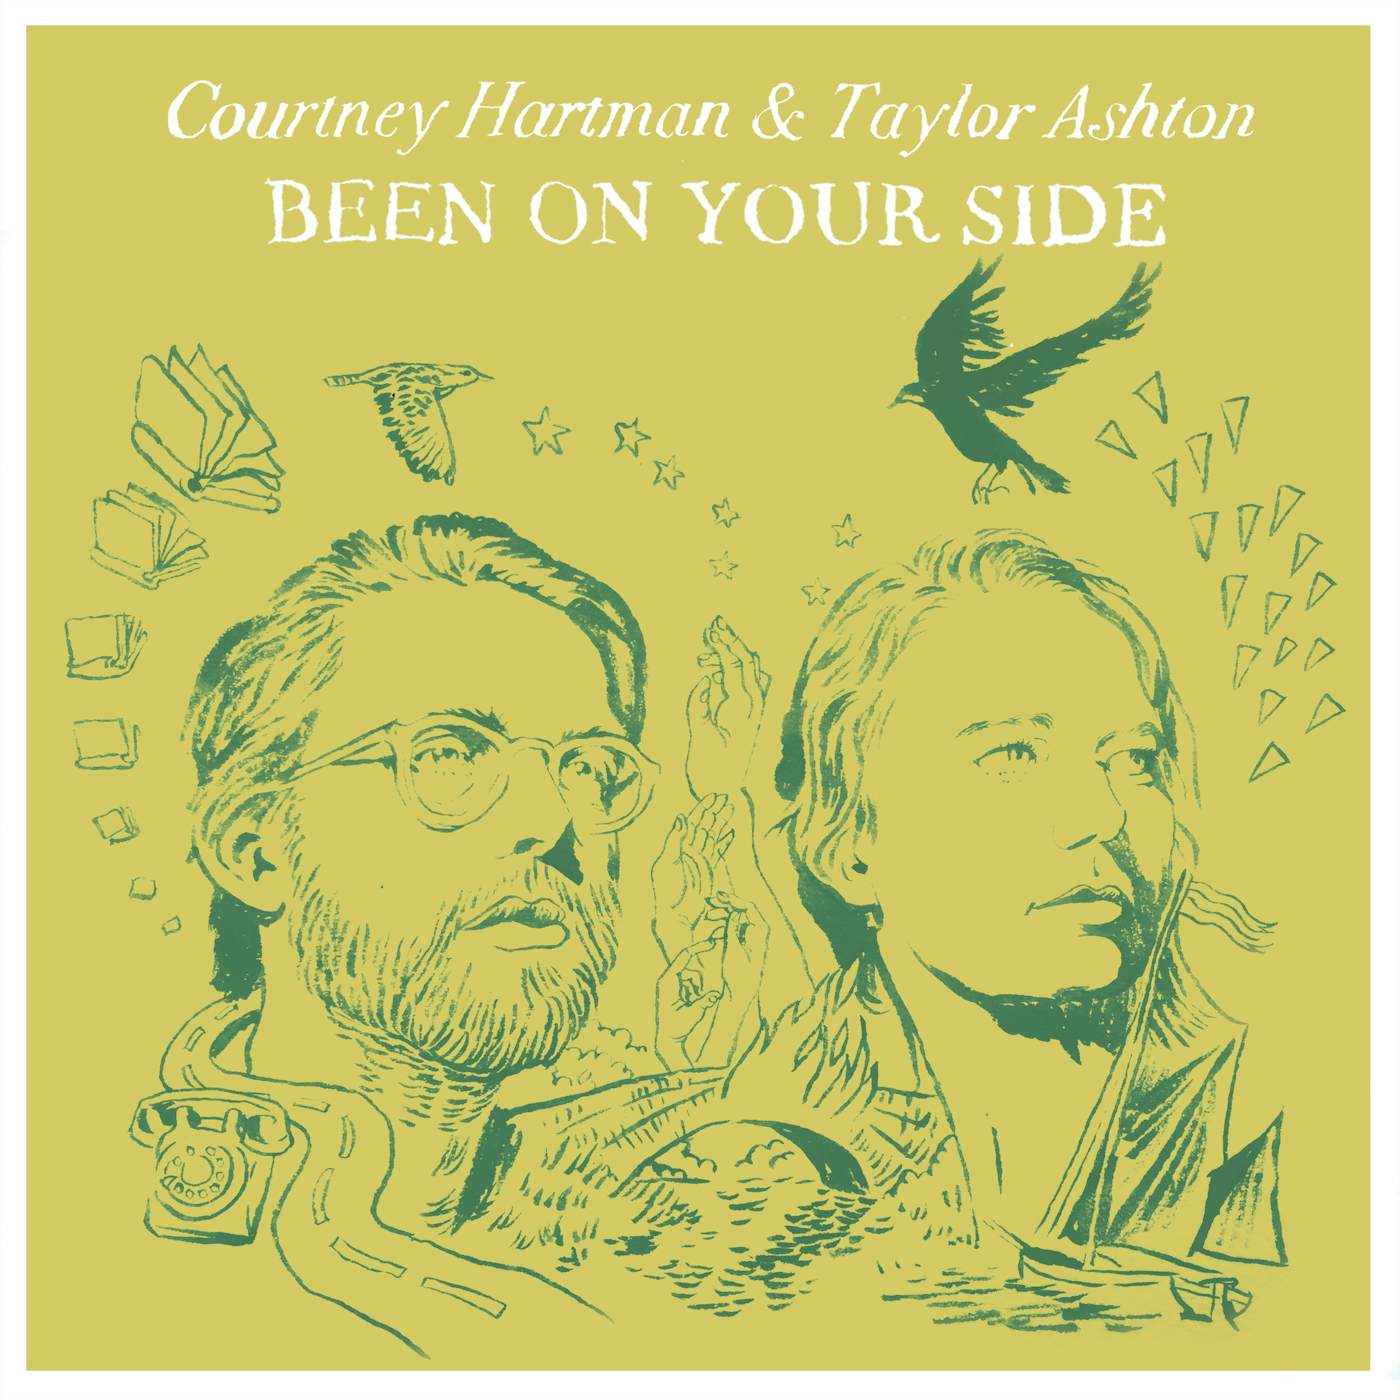 Courtney Hartman & Taylor Ashton BEEN ON YOUR SIDE CD